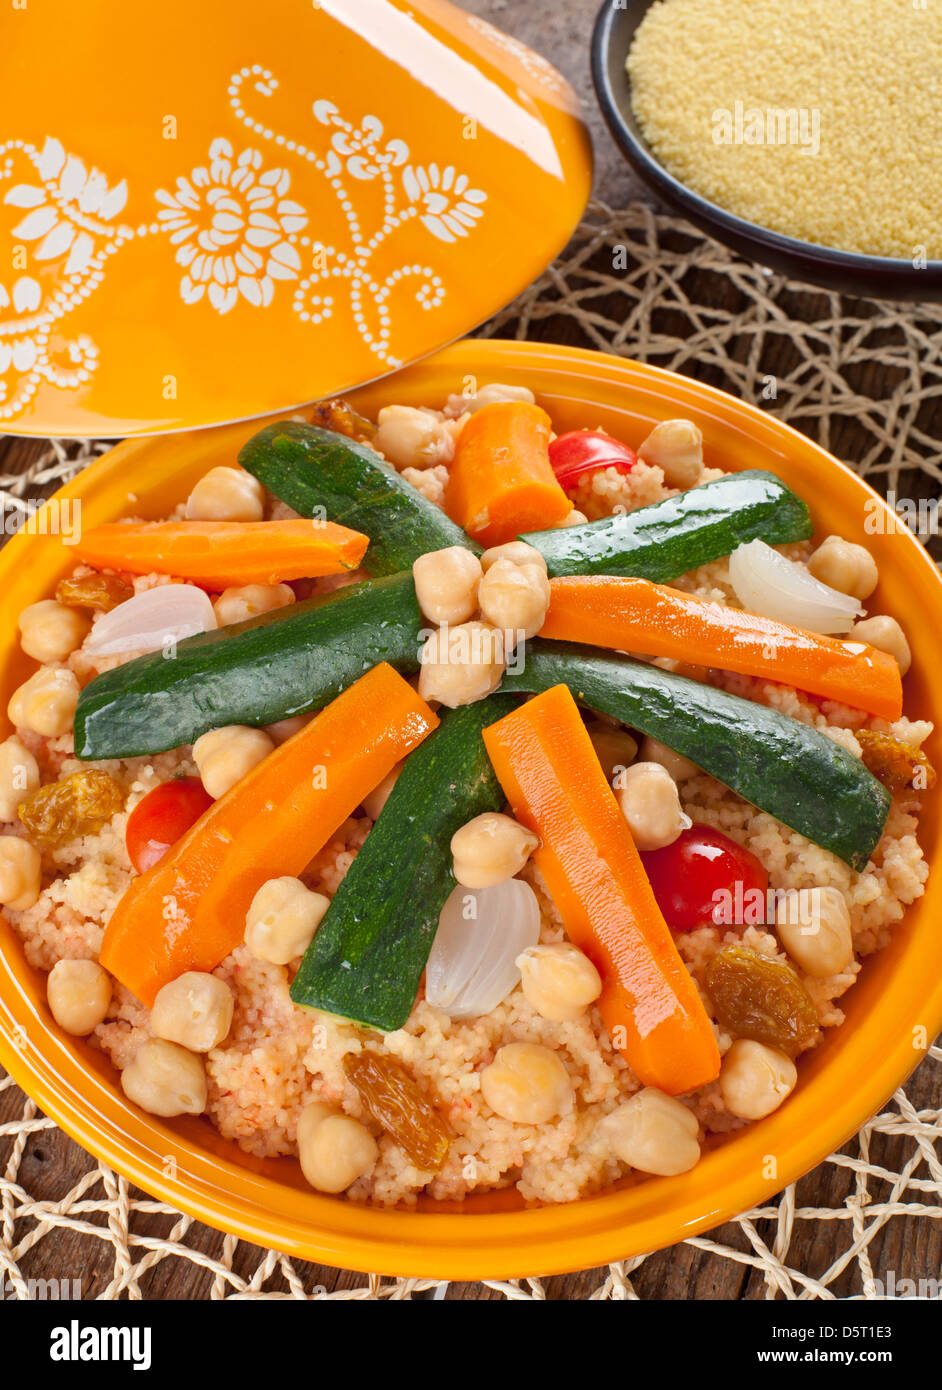 Vegetable Tajine with cous cous Stock Photo